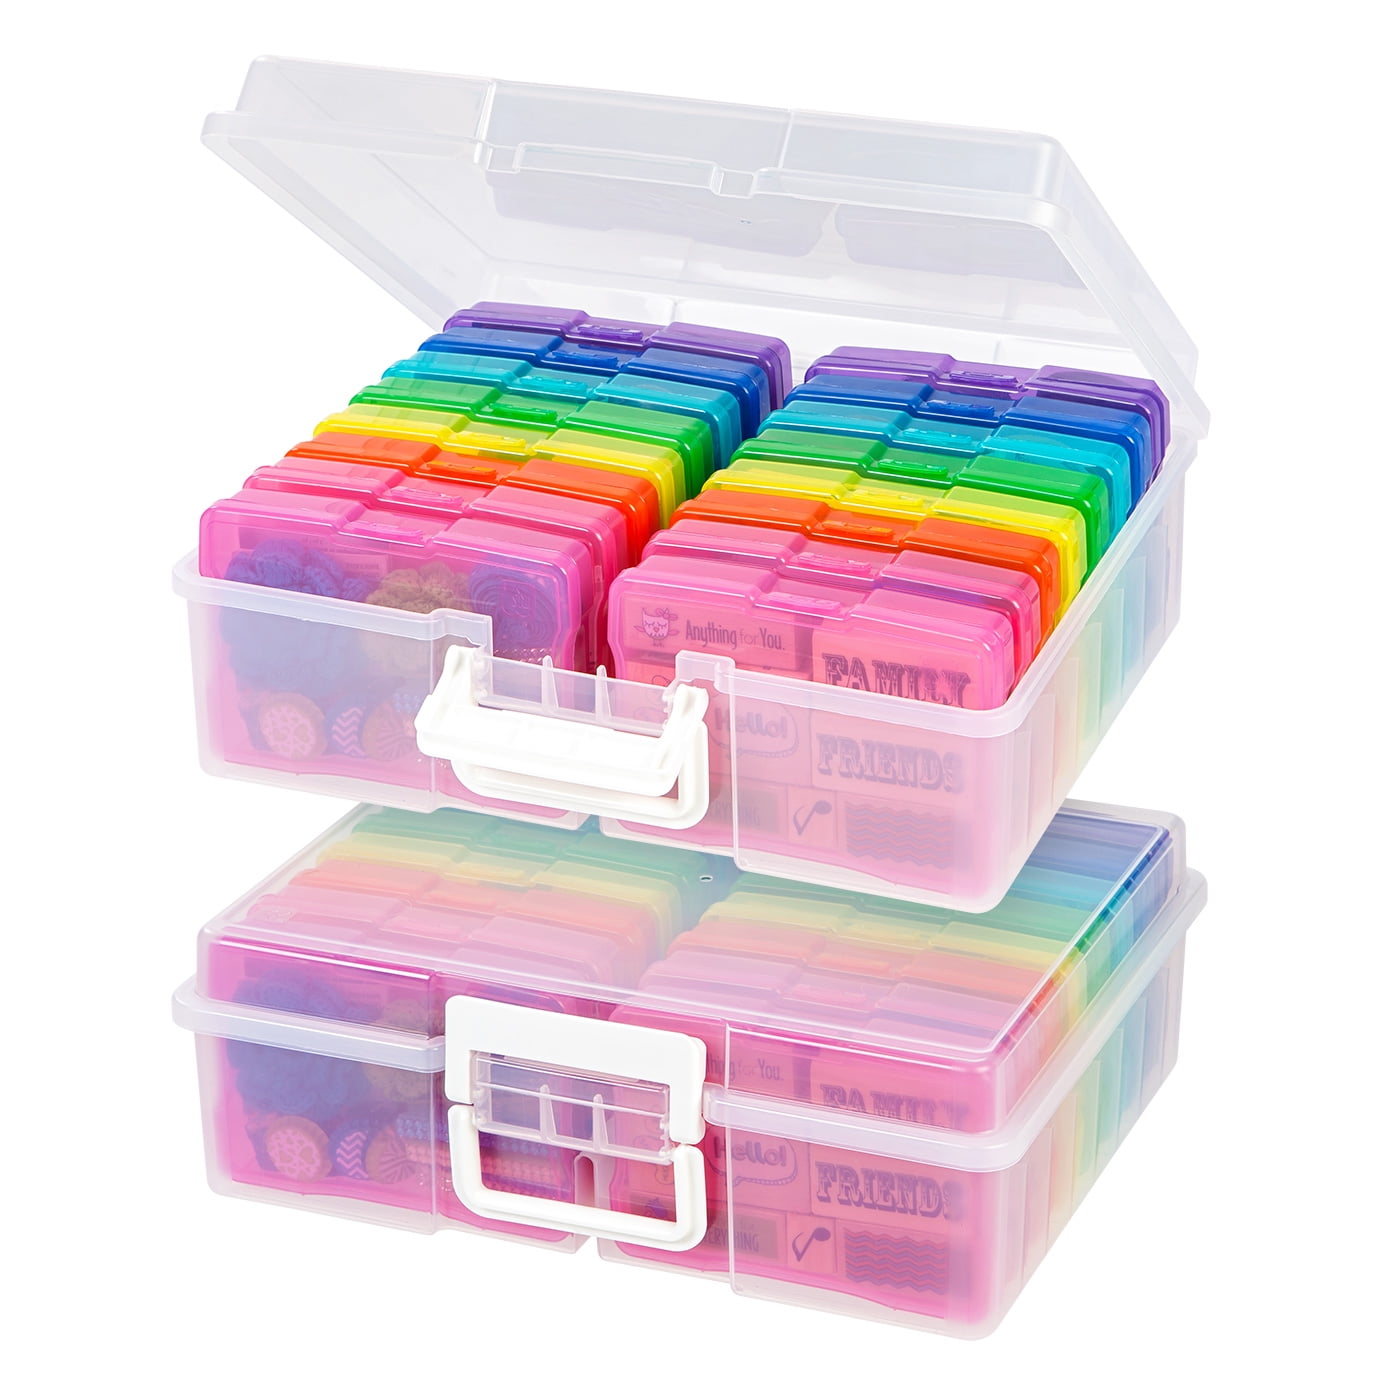 16 Inner Photo Keeper Novelinks Photo Case 4 x 6 Photo Storage Box Multi-Colored + Clear + Clear 